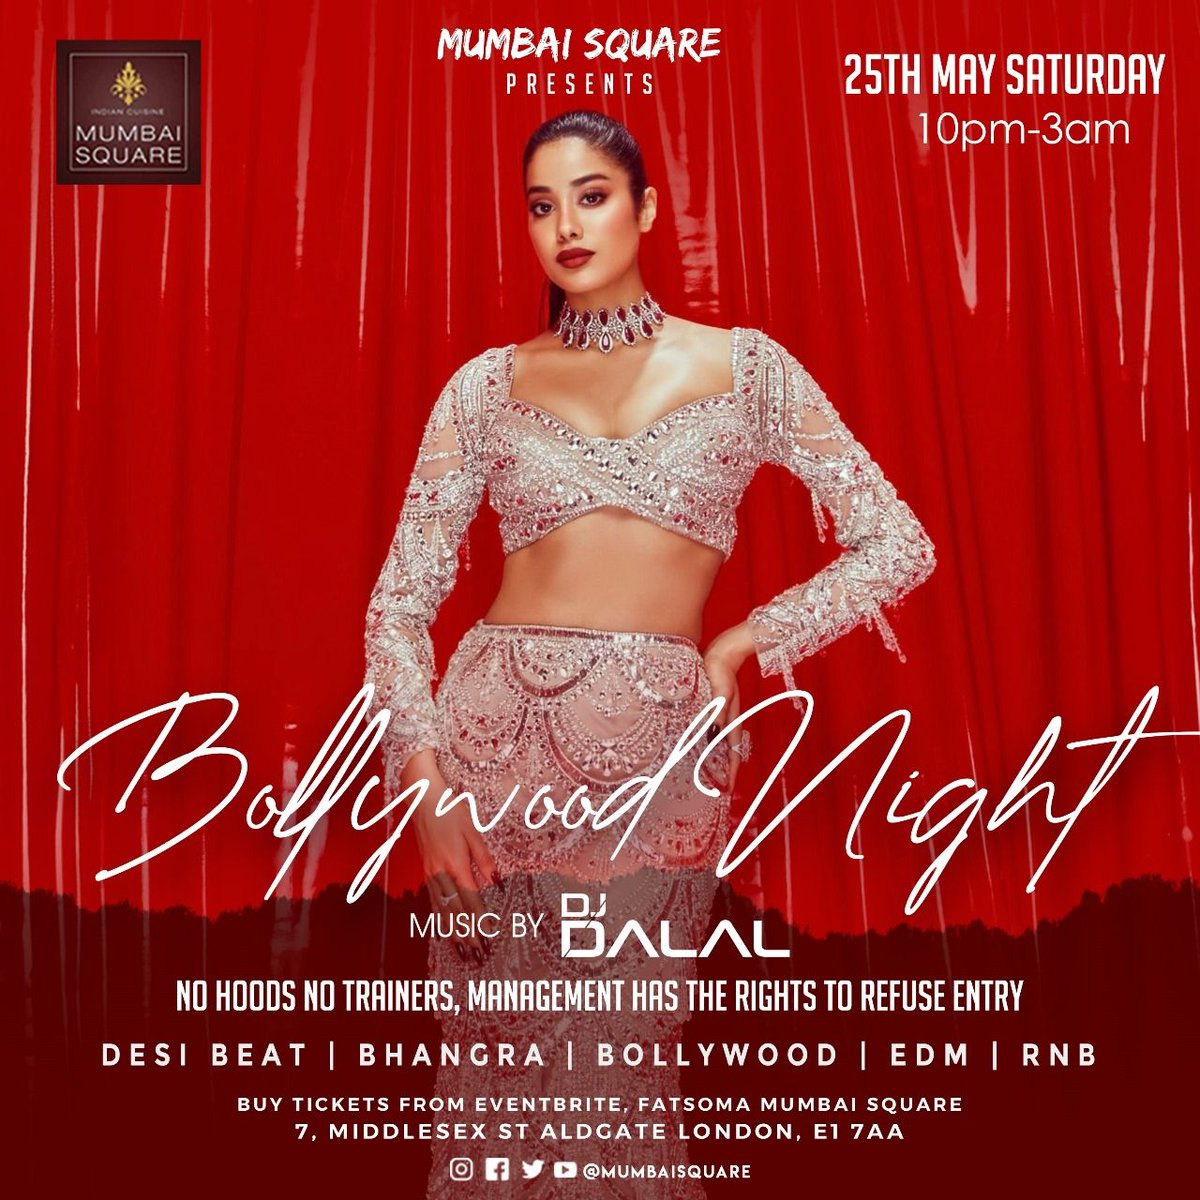 Time for celebration..! Bollywood Night Party !, and we proudly announce bollywood madness party at Mumbai Square on 25th May Come join us to a crazy fun loving party, click below to grab your tickets now buff.ly/3xTWQr4 ! #BNP #bollywoodnightparty #bollywoodParty